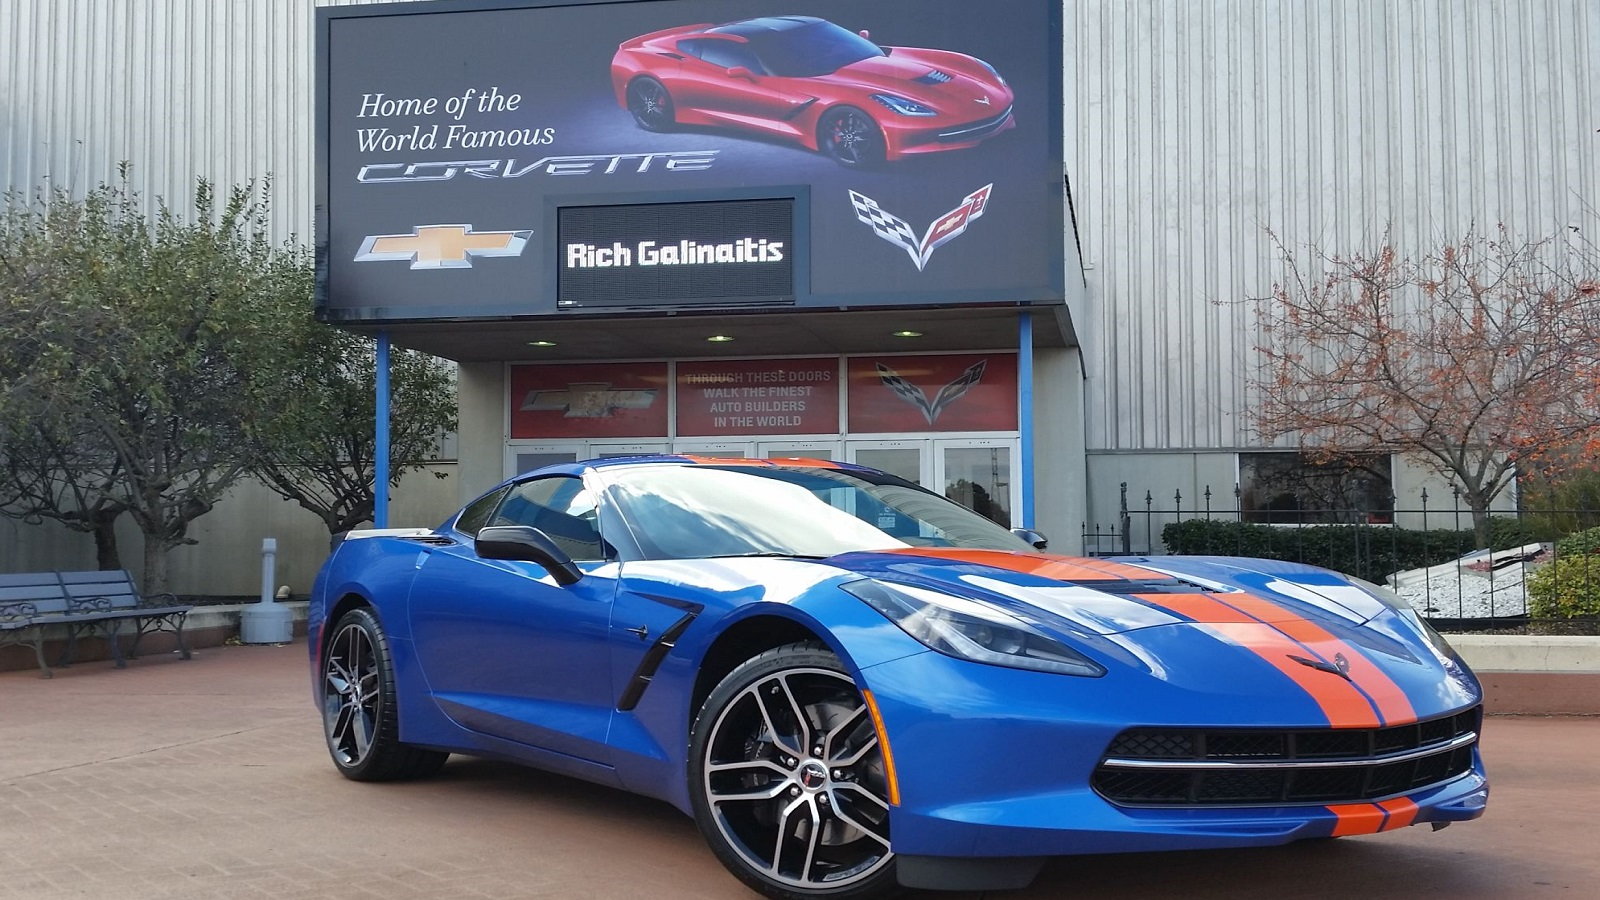 6 Things To See And Do At The Bowling Green Corvette Factory